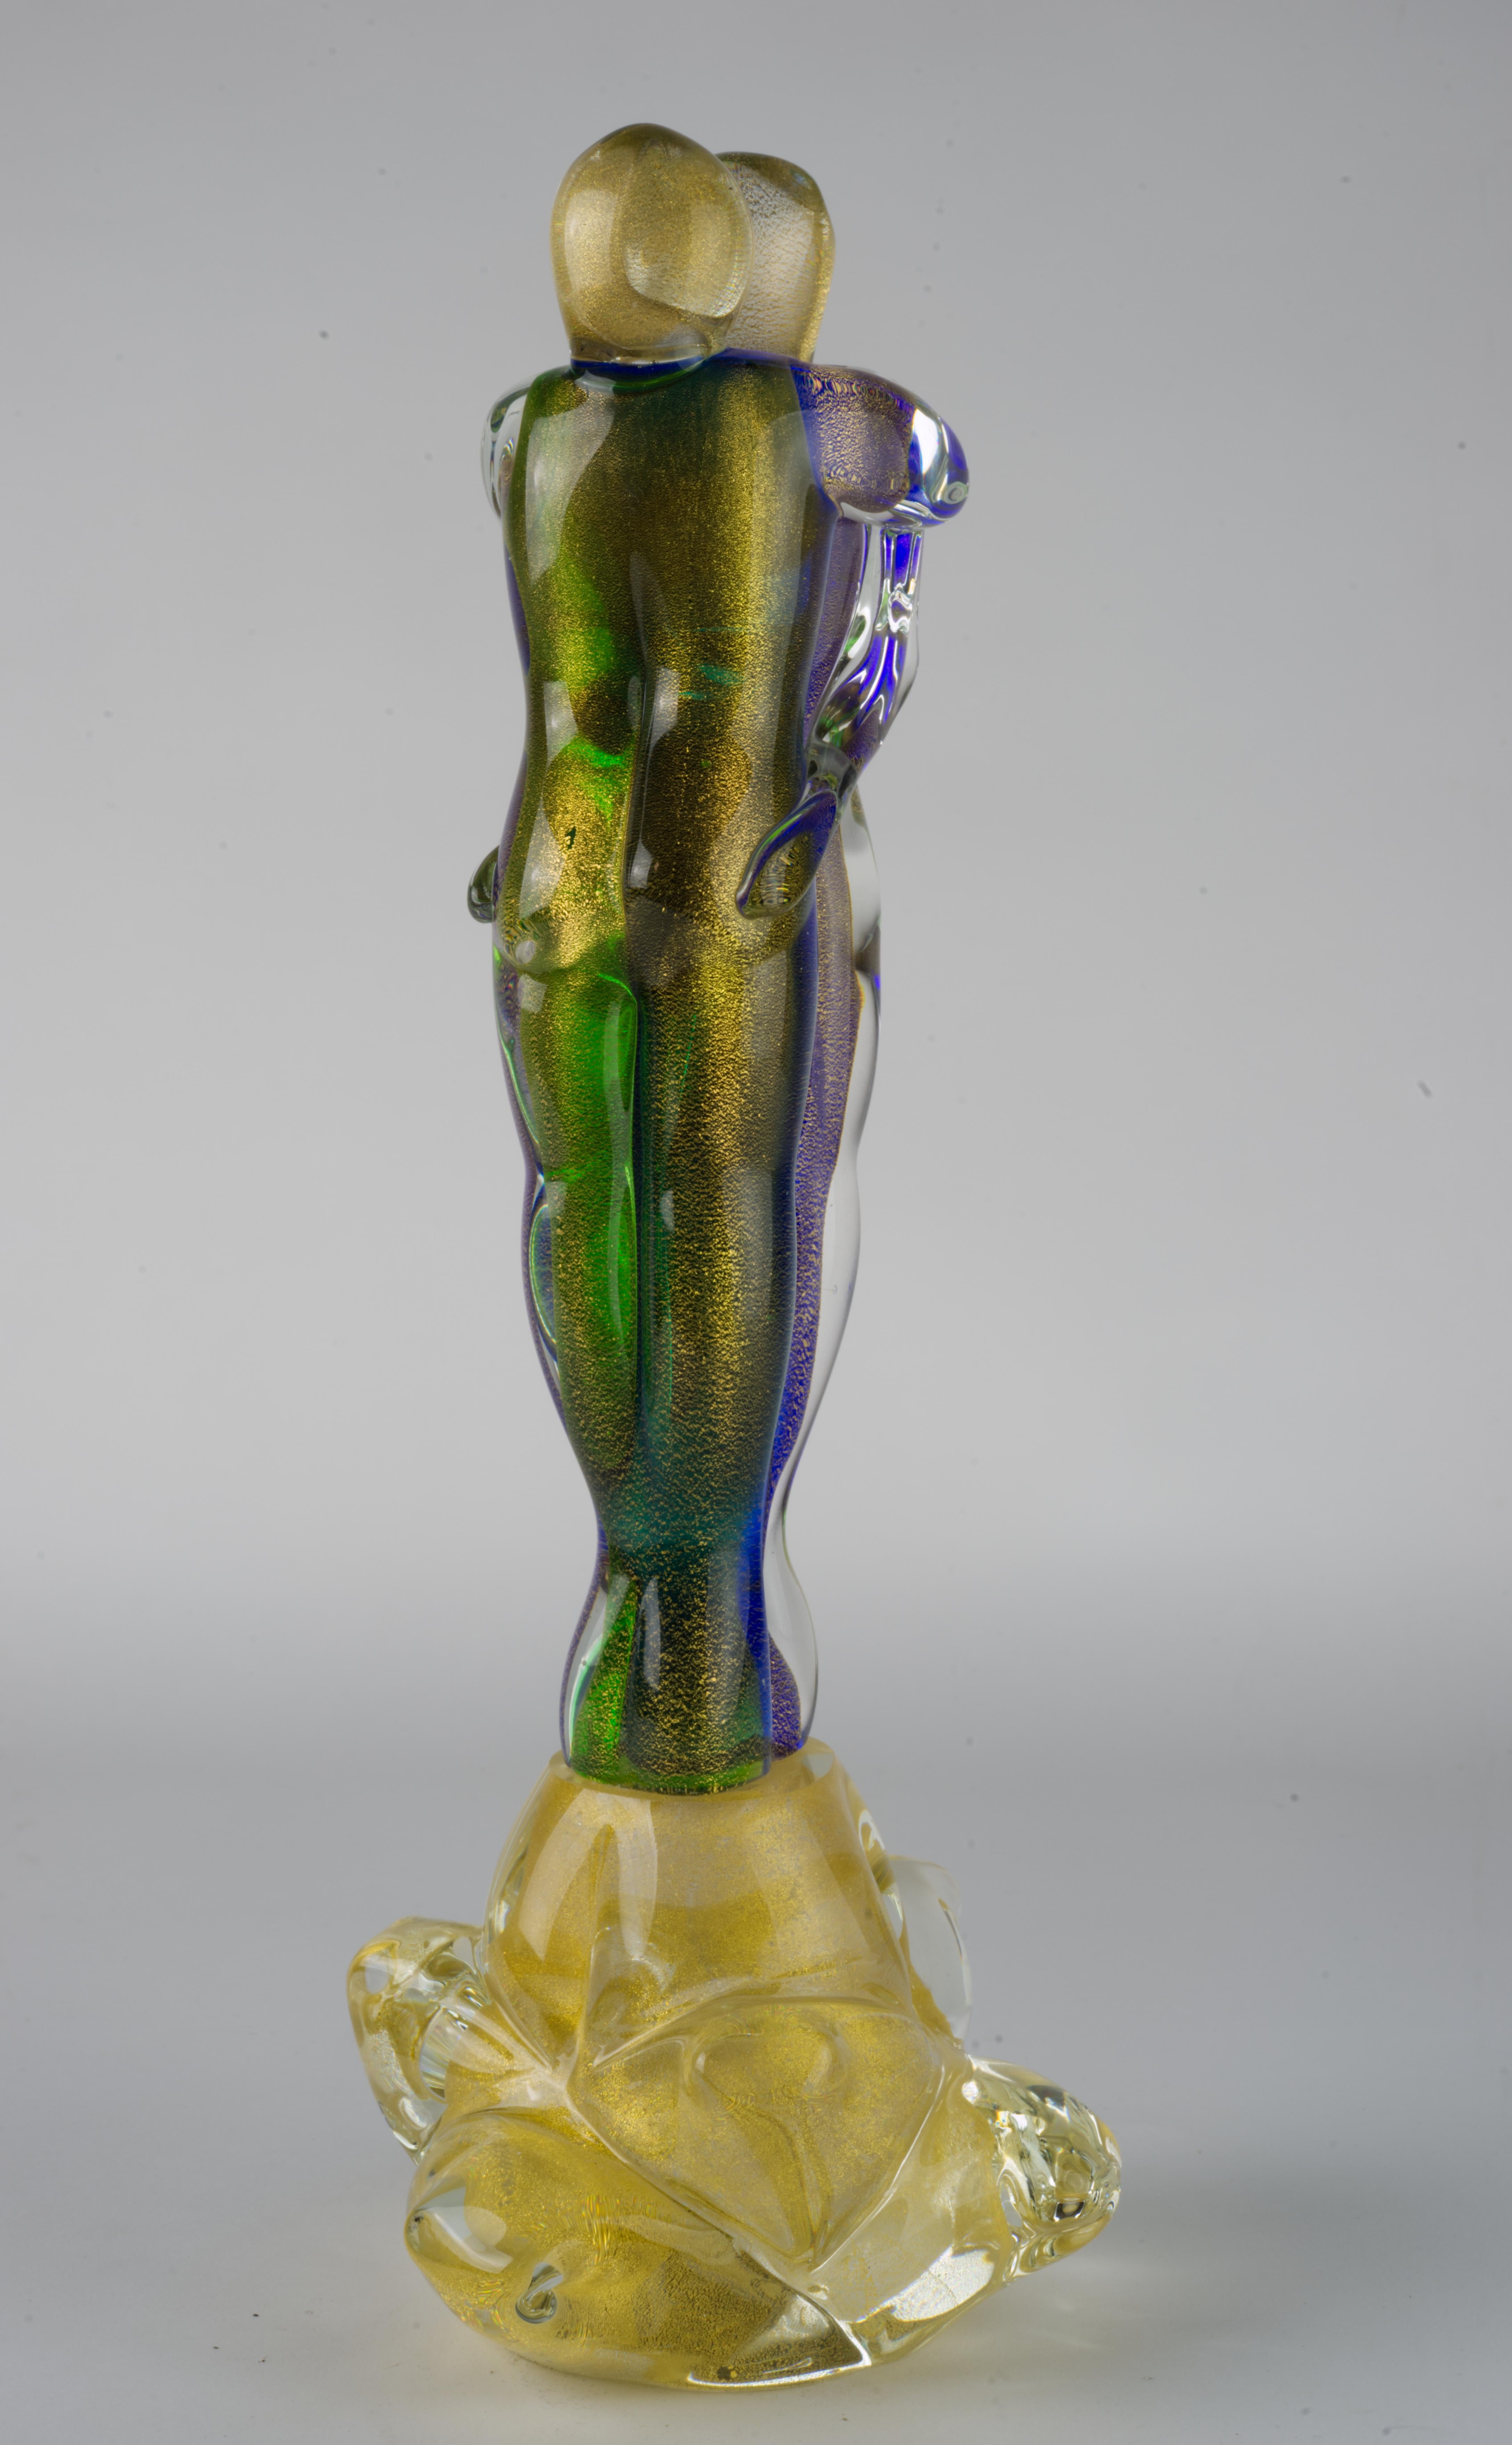 Abstract Murano glass sculpture of two lovers embracing is made in green, purple, and clear glass with gold flakes inclusions, encased in clear glass in sommerso technique. The two figures are supported by a figurative base, done in clear glass with